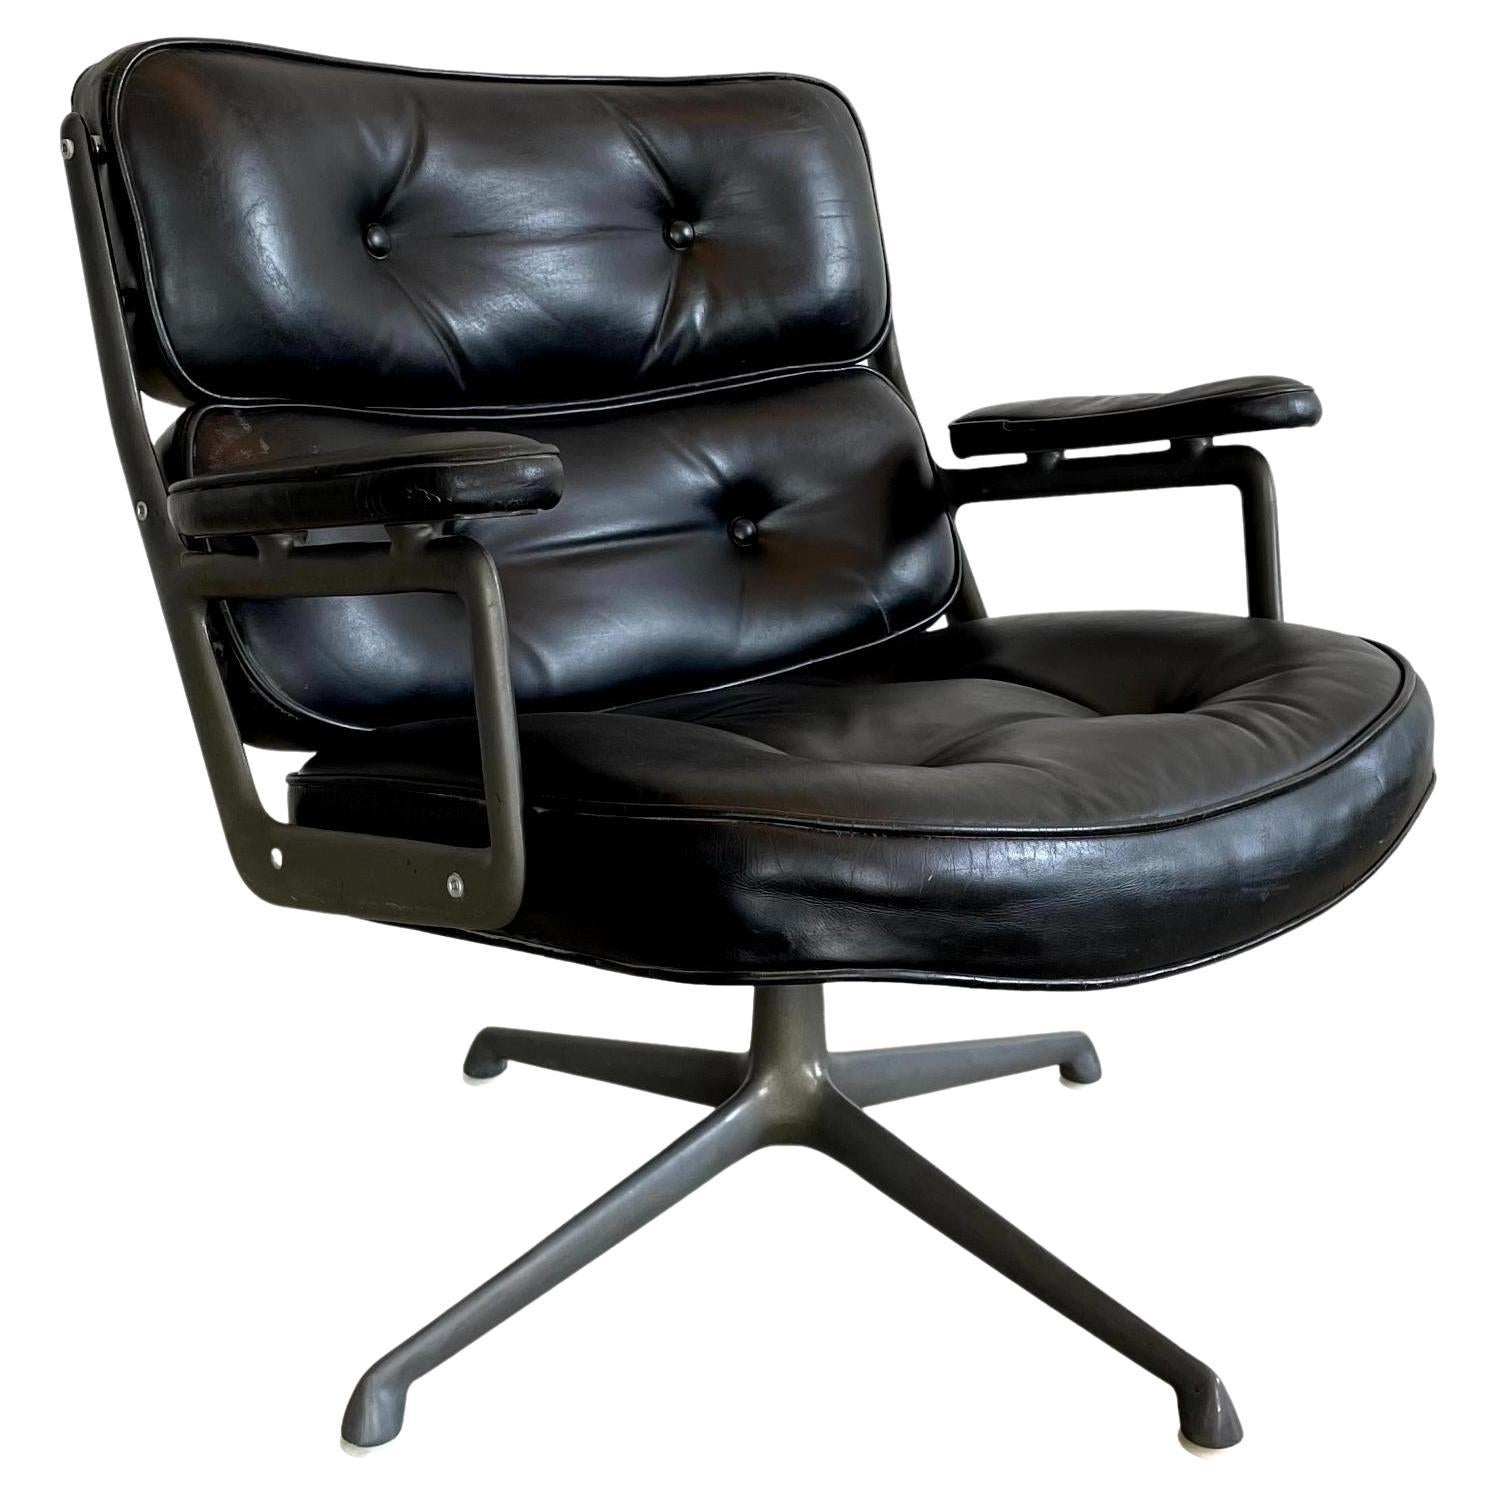 Eames Time Life Lobby Lounge Chair in Black Leather for Herman Miller, 1980s USA For Sale